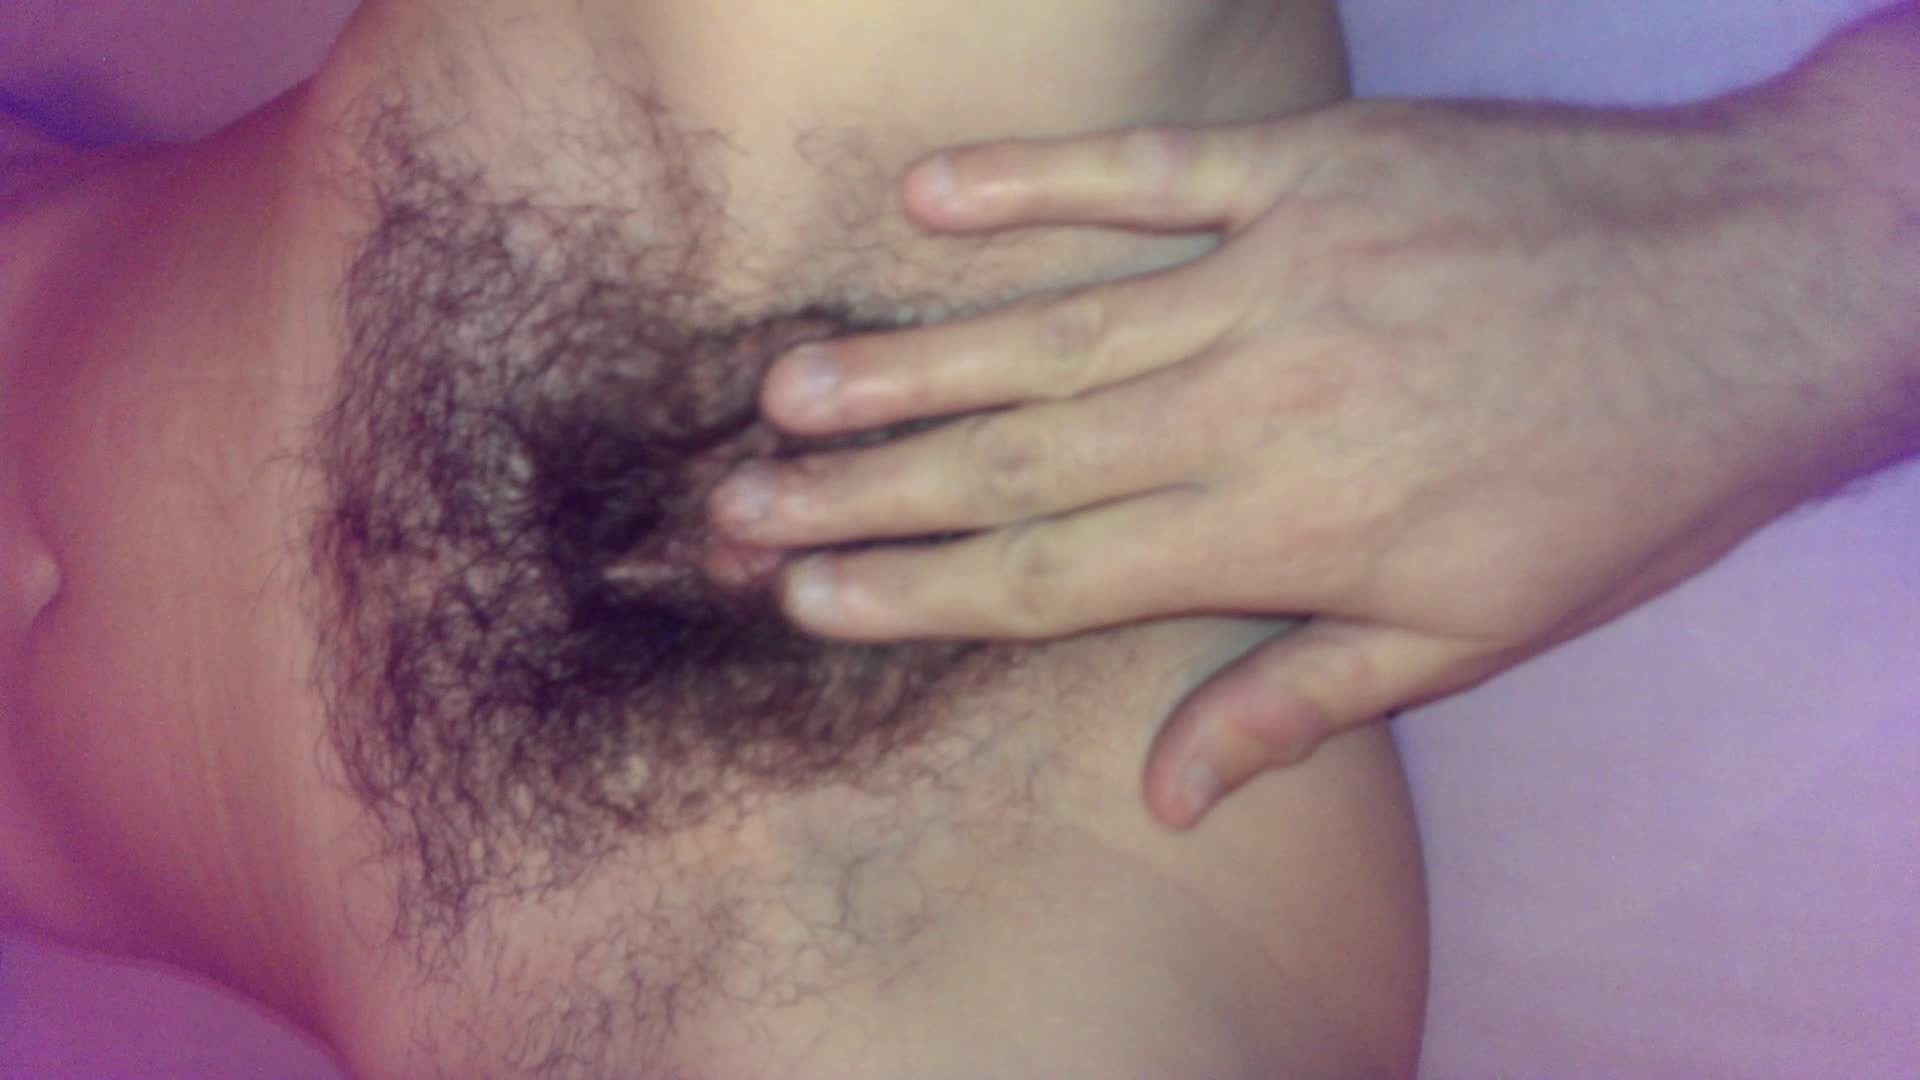 Super Hairy Homemade On Yuvutu Homemade Amateur Porn Movies And Xxx Sex Videos